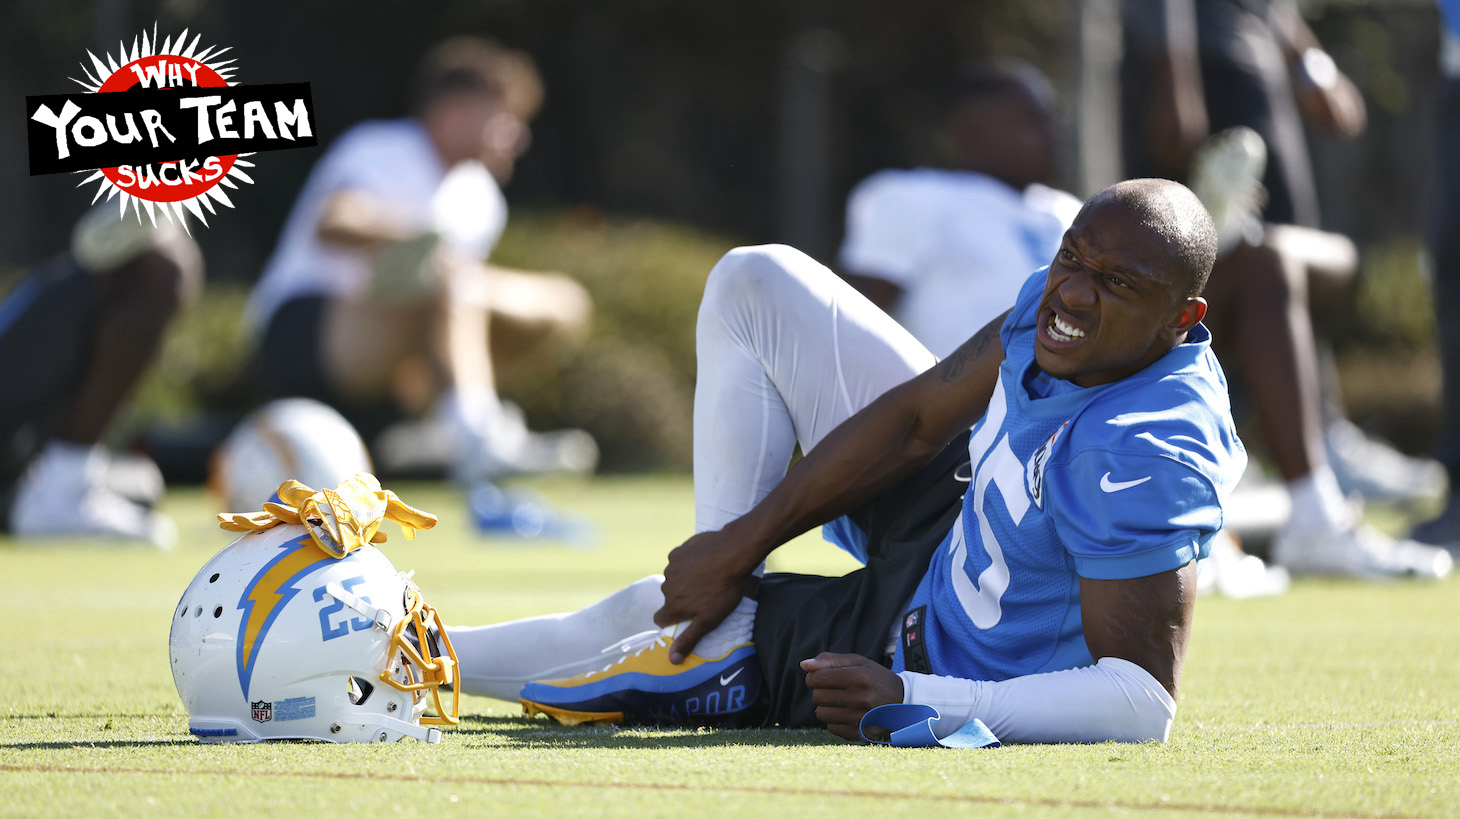 COSTA MESA, CALIFORNIA - JULY 29: Chris Harris #25 of the Los Angeles Chargers warms up during Los Angeles Chargers Training Camp at Jack Hammett Sports Complex on July 29, 2021 in Costa Mesa, California. (Photo by Michael Owens/Getty Images)